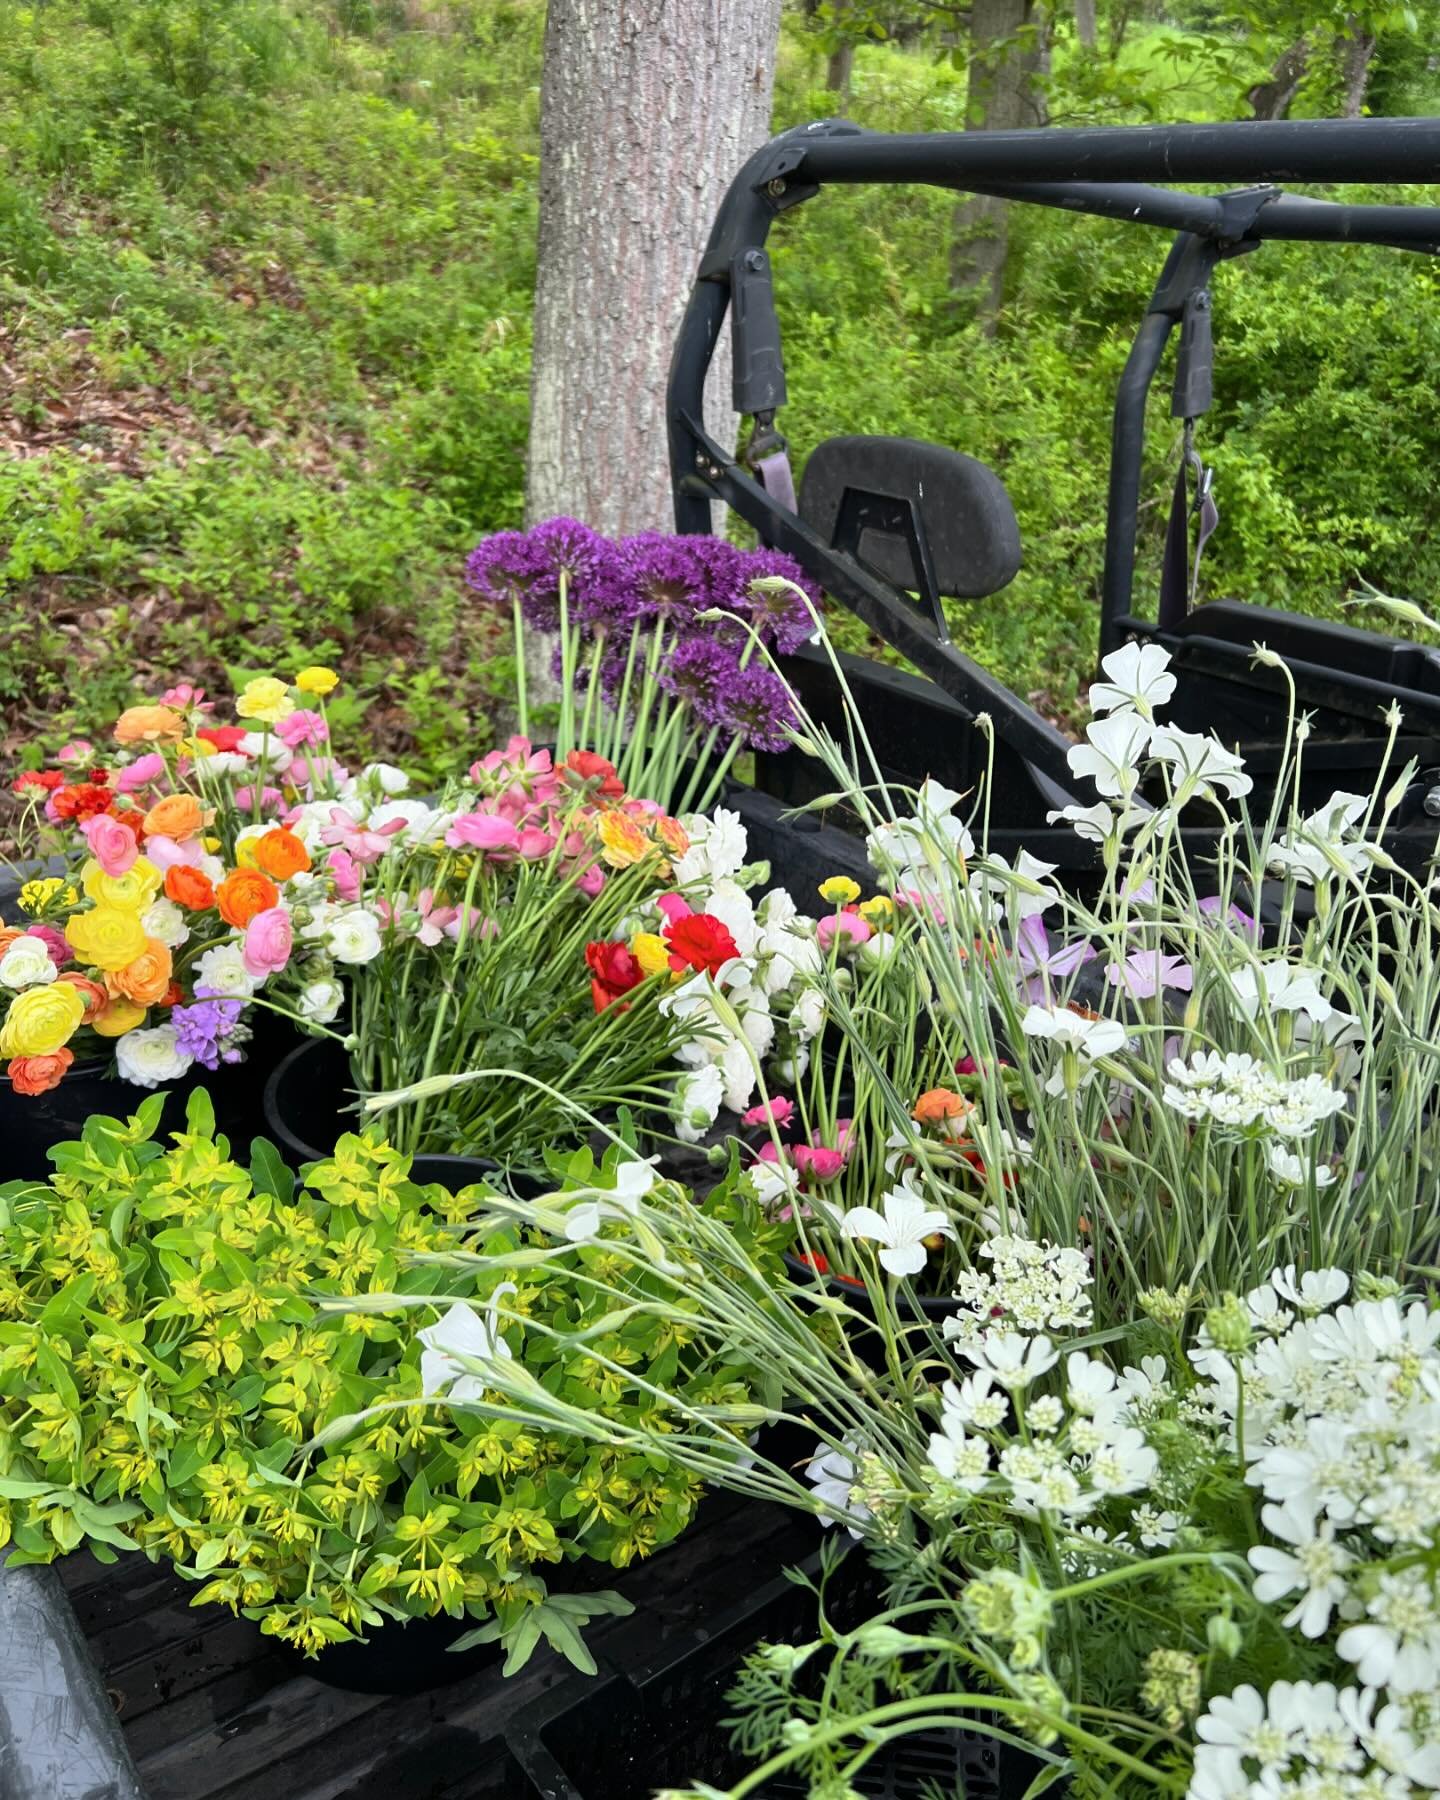 Just a sneak peek of what we are harvesting these days! Allium, euphorbia, Orlaya, Agrostemma, and have I said RANUNCULUS AND ANEMONE?!

So excited for this month&rsquo;s flowers!!!!

#elevenmilefarm #cutflowerfarm #cutflowers #locallygrownflowers #f